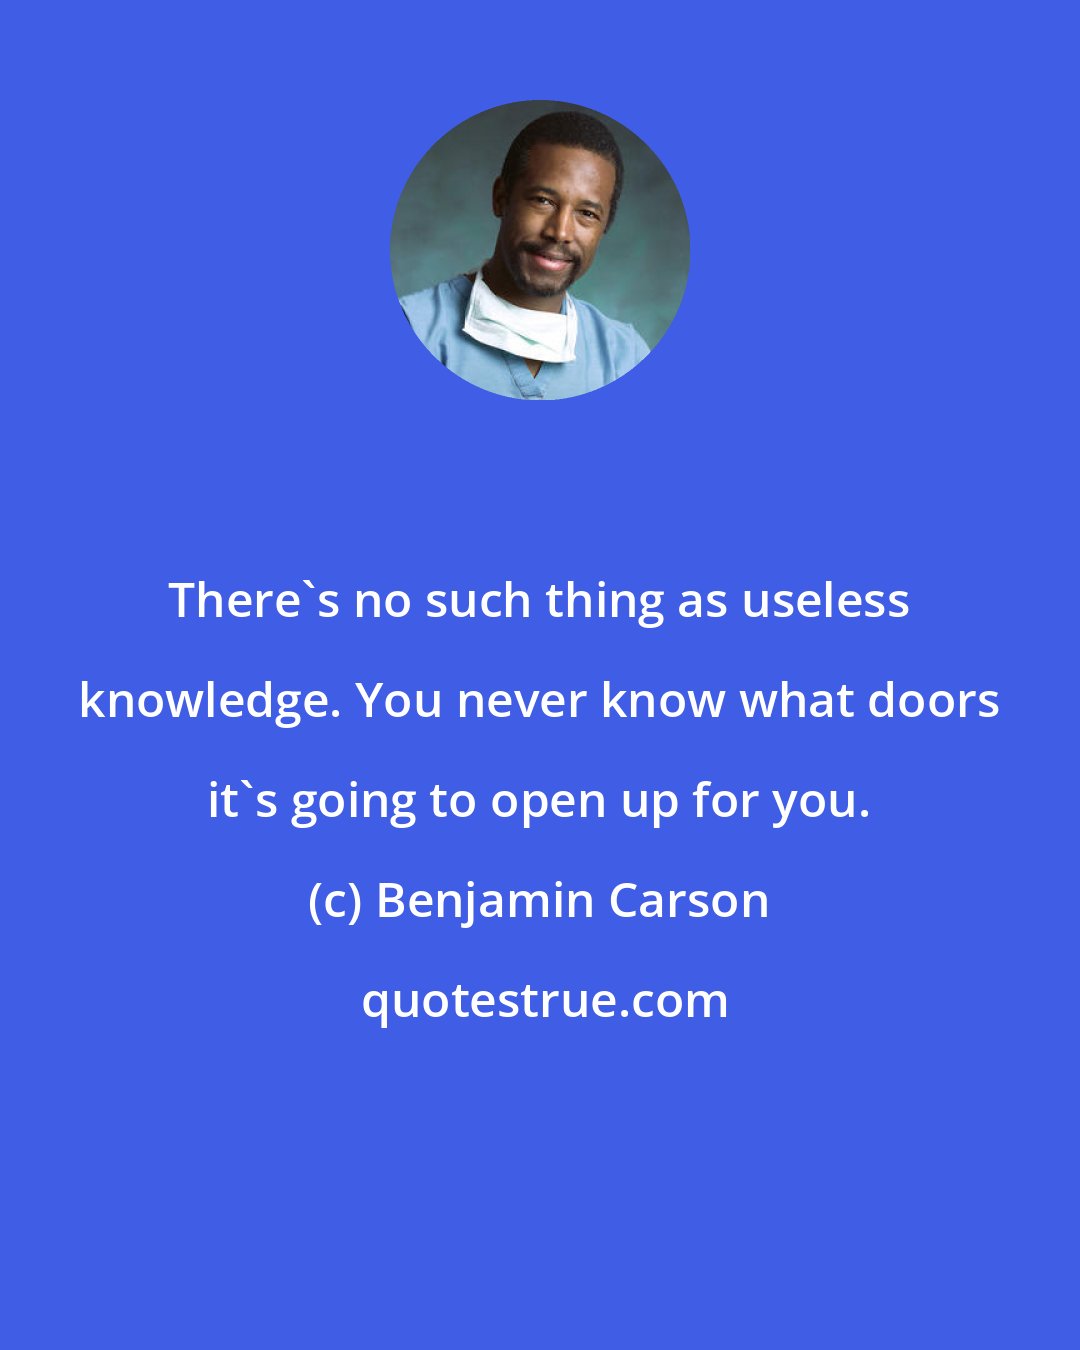 Benjamin Carson: There's no such thing as useless knowledge. You never know what doors it's going to open up for you.